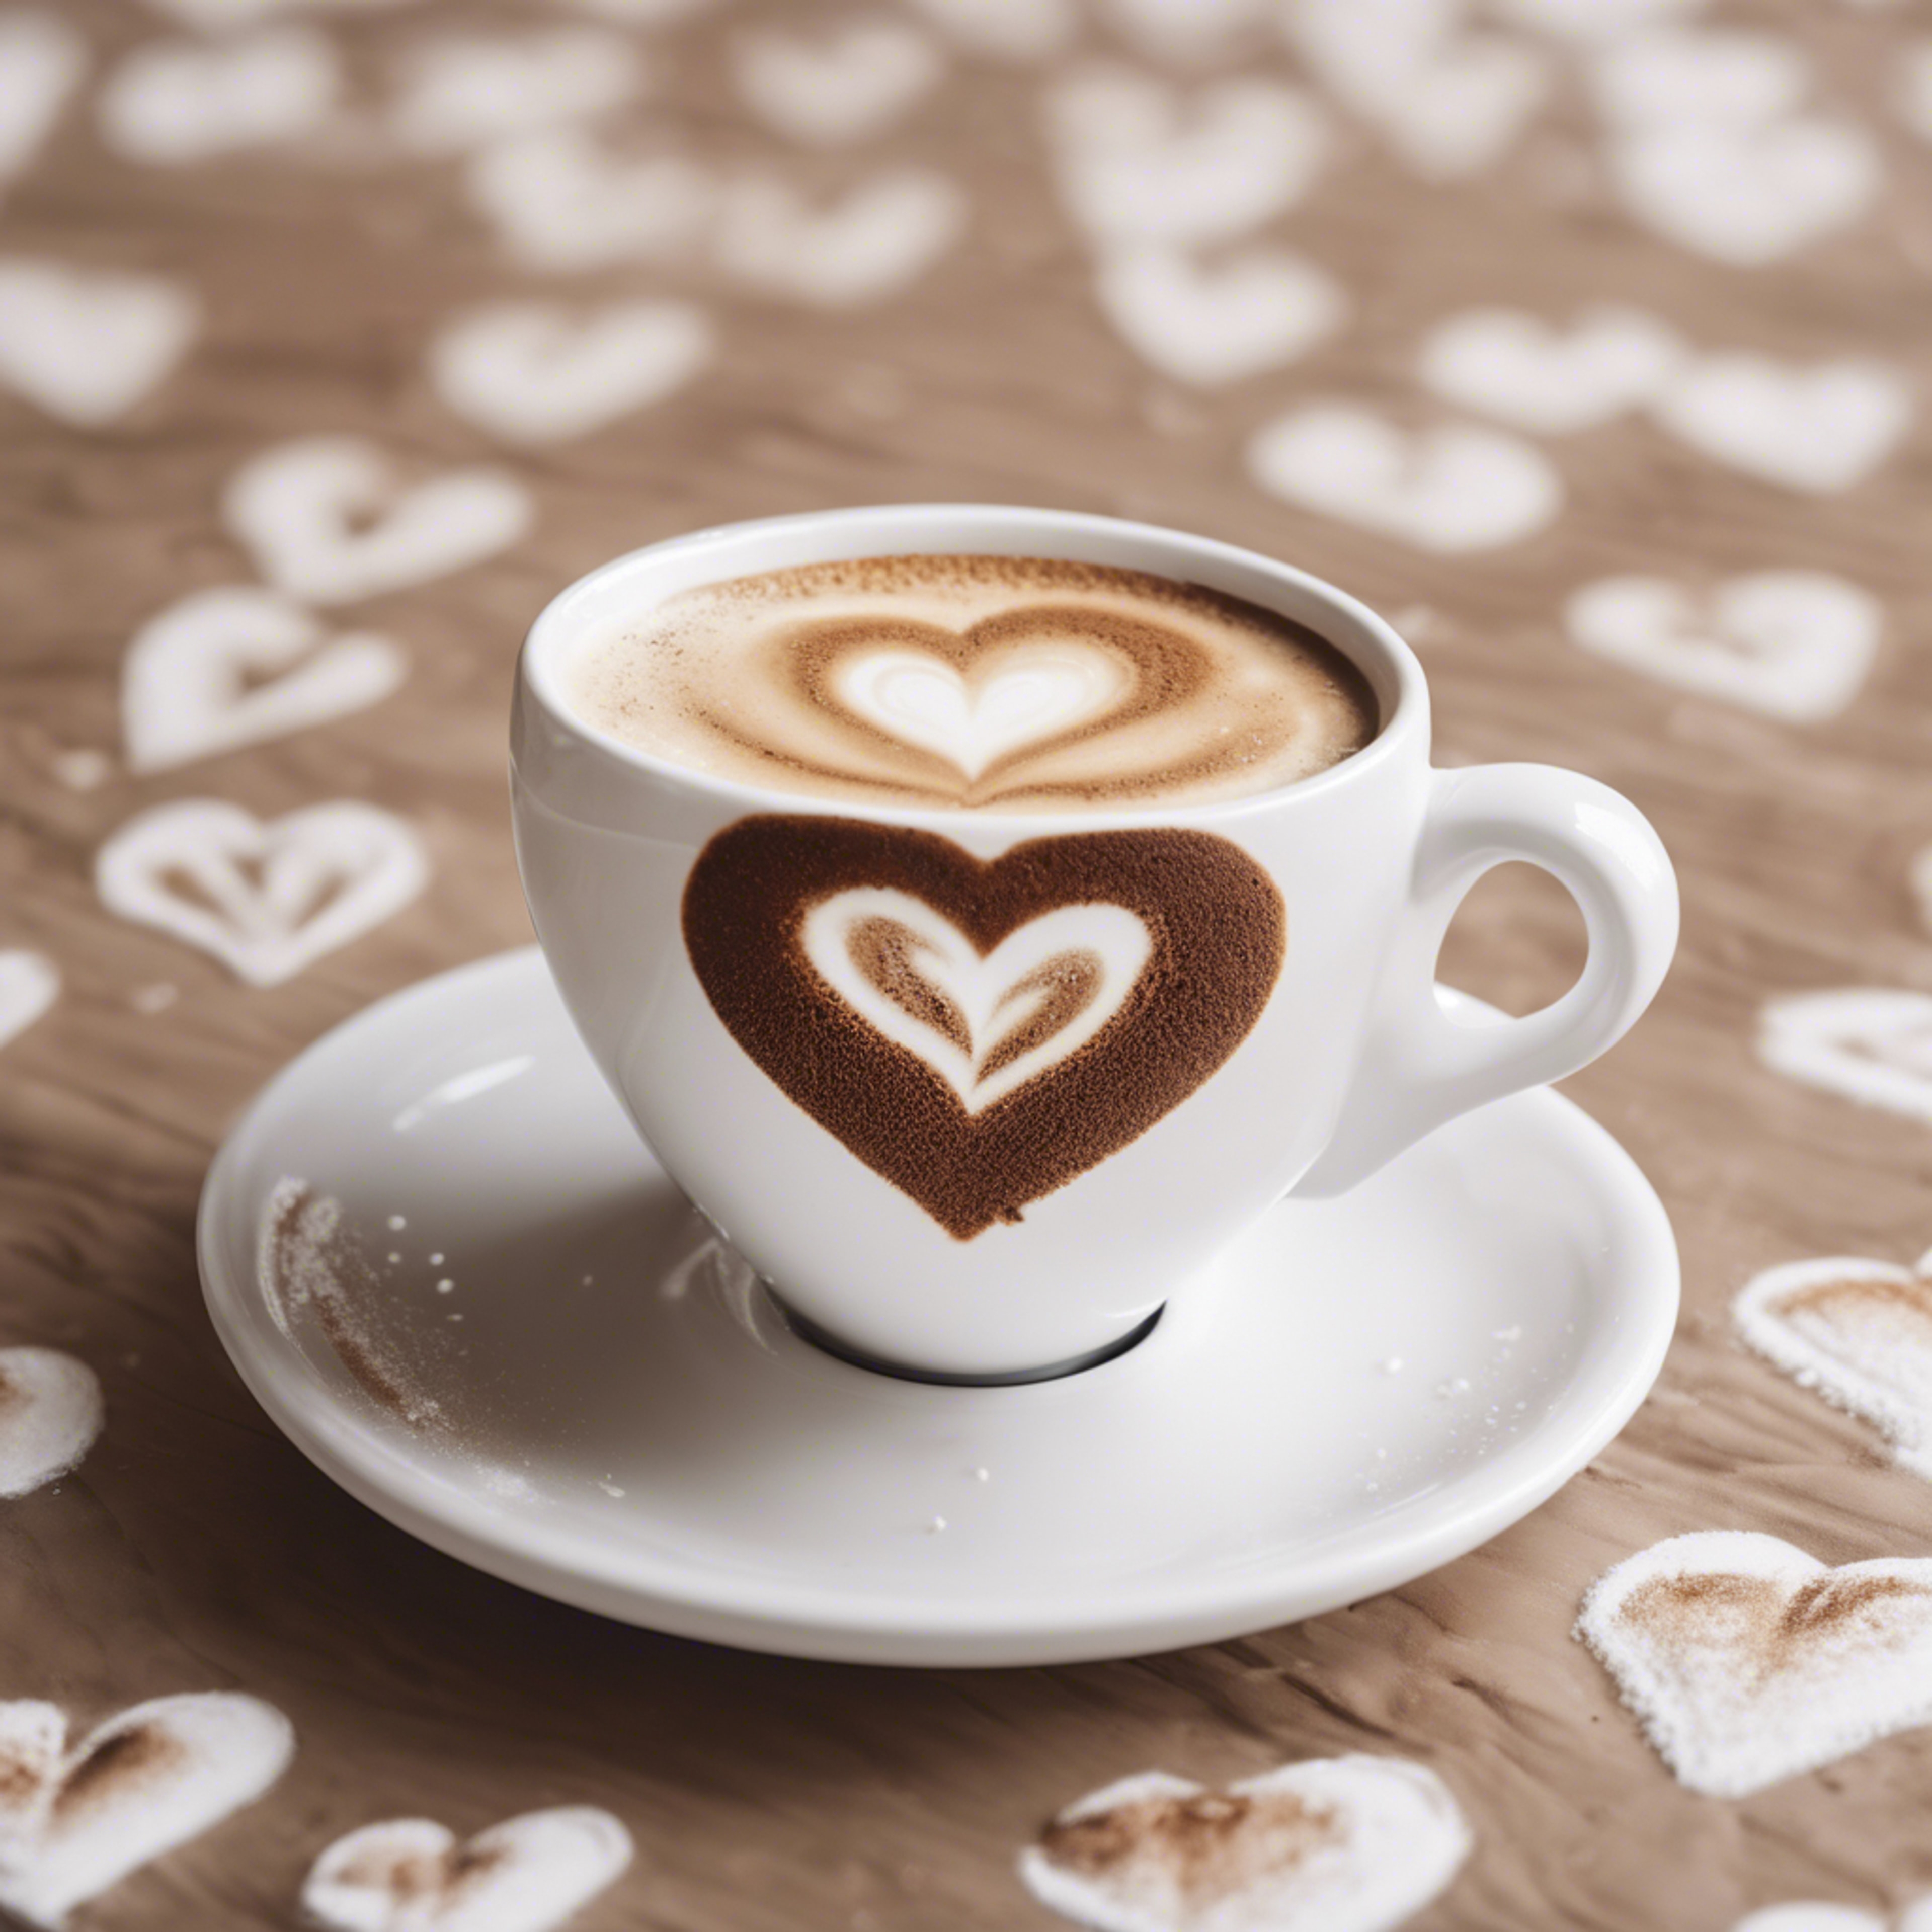 A delicate heart pattern made in the brown froth of a cappuccino in a white cup.壁紙[d7bae012dd9b48868f68]